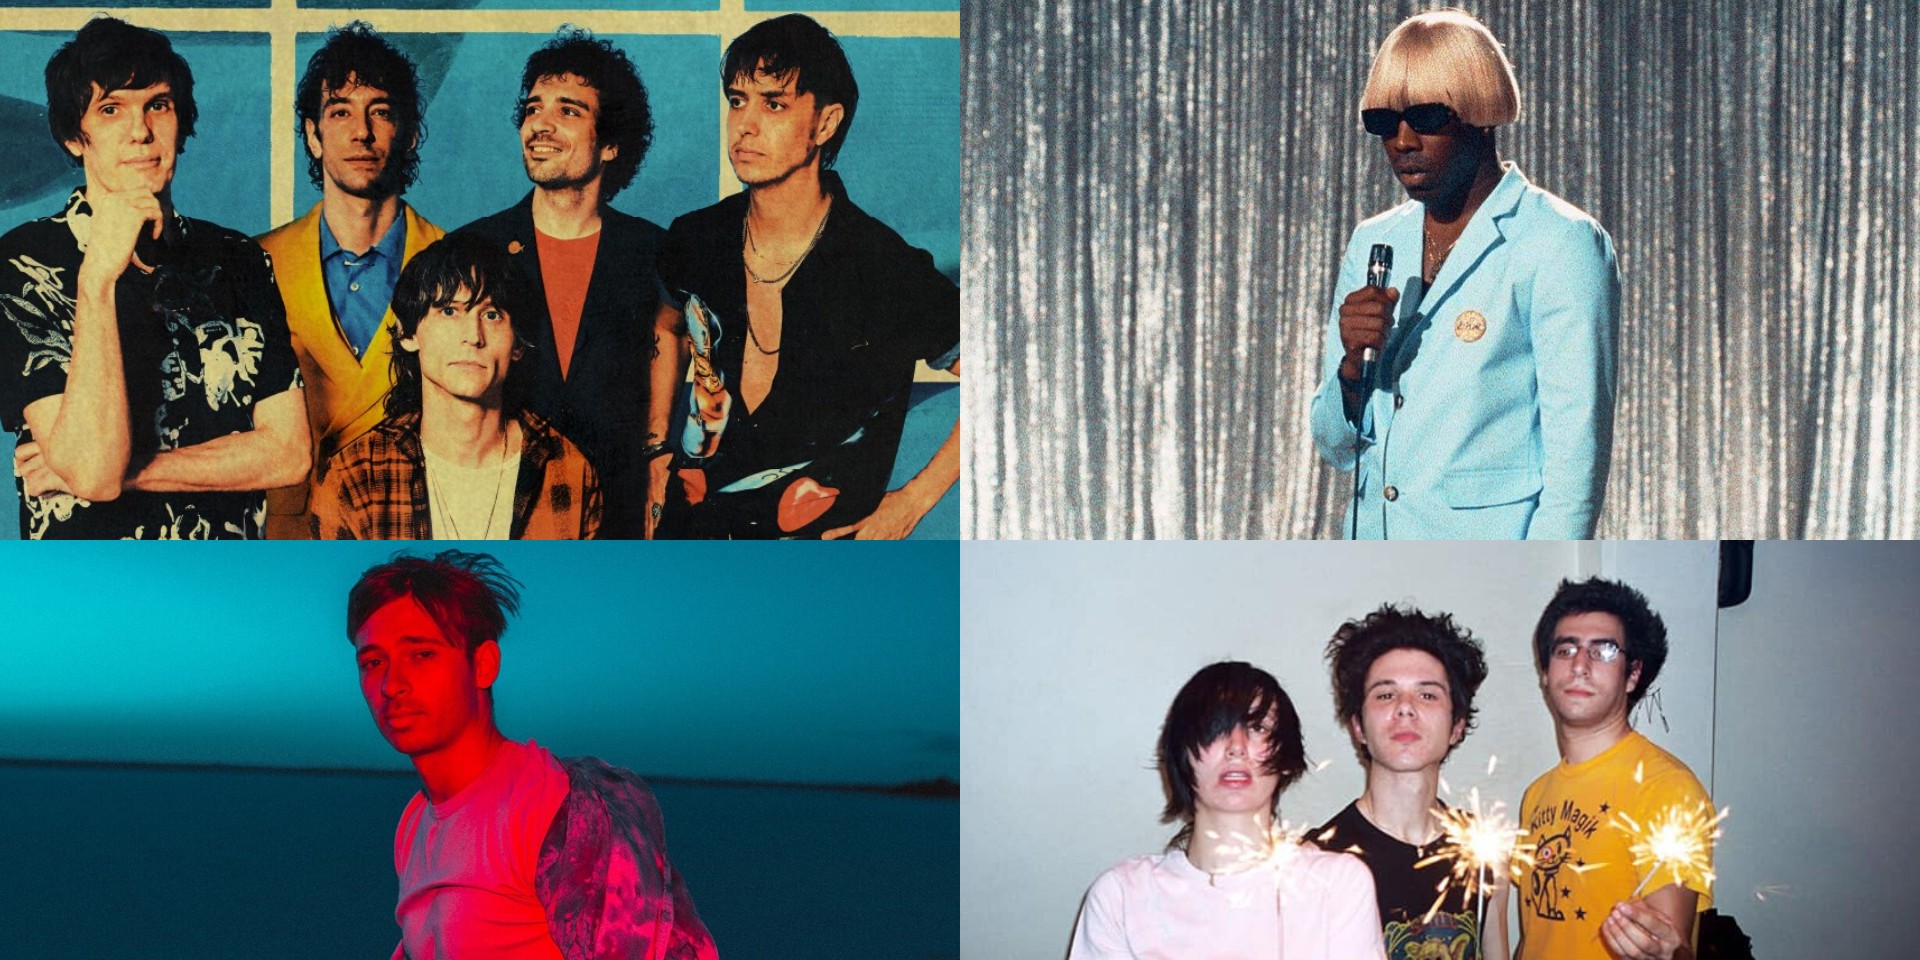 The Strokes, Tyler, The Creator, Flume, Yeah Yeah Yeahs, and more to perform at Splendour in the Grass 2020